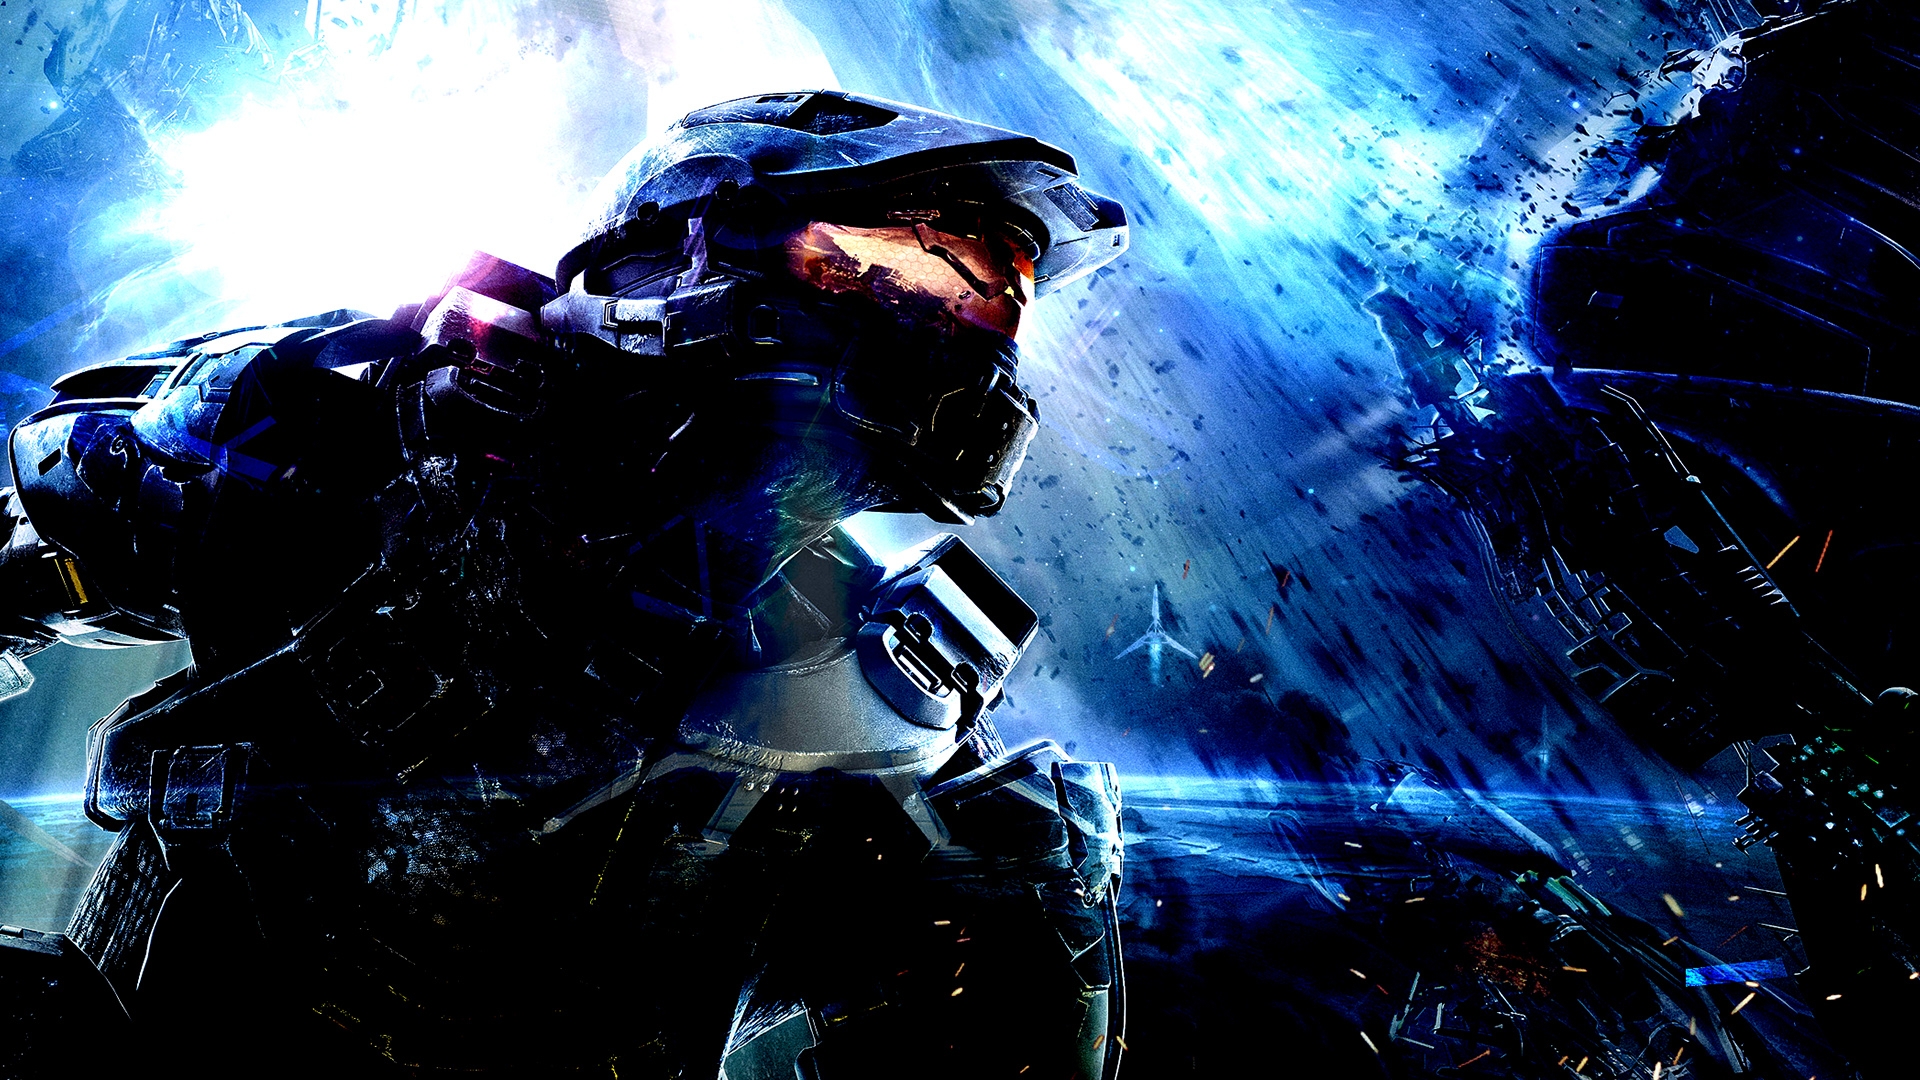 Halo E3 Wallpaper Pictures Gallery